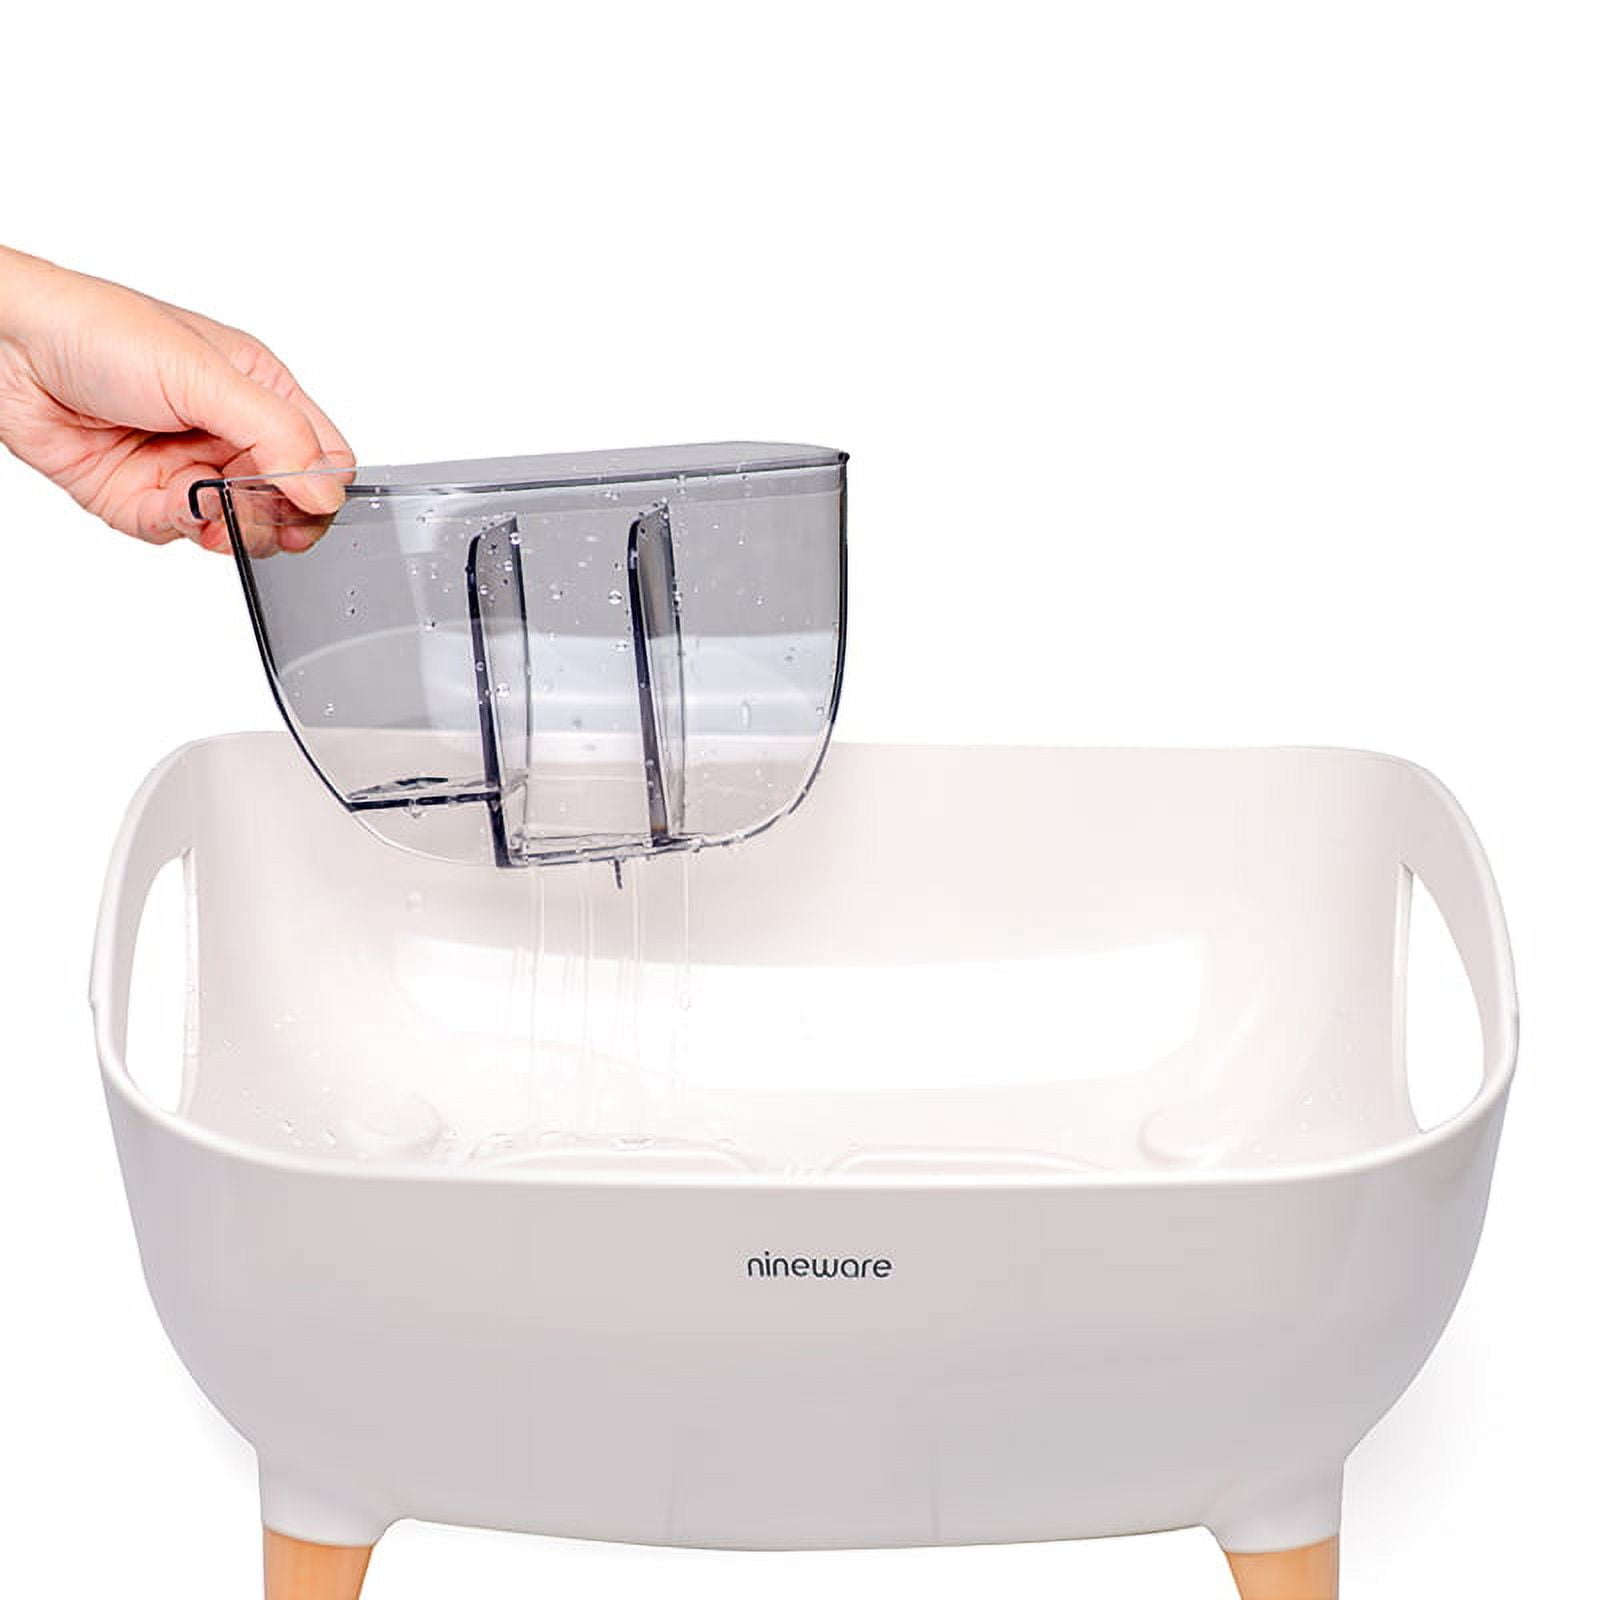 This self-drying dish rack uses an organic mineral to instantly evaporate  water - Yanko Design